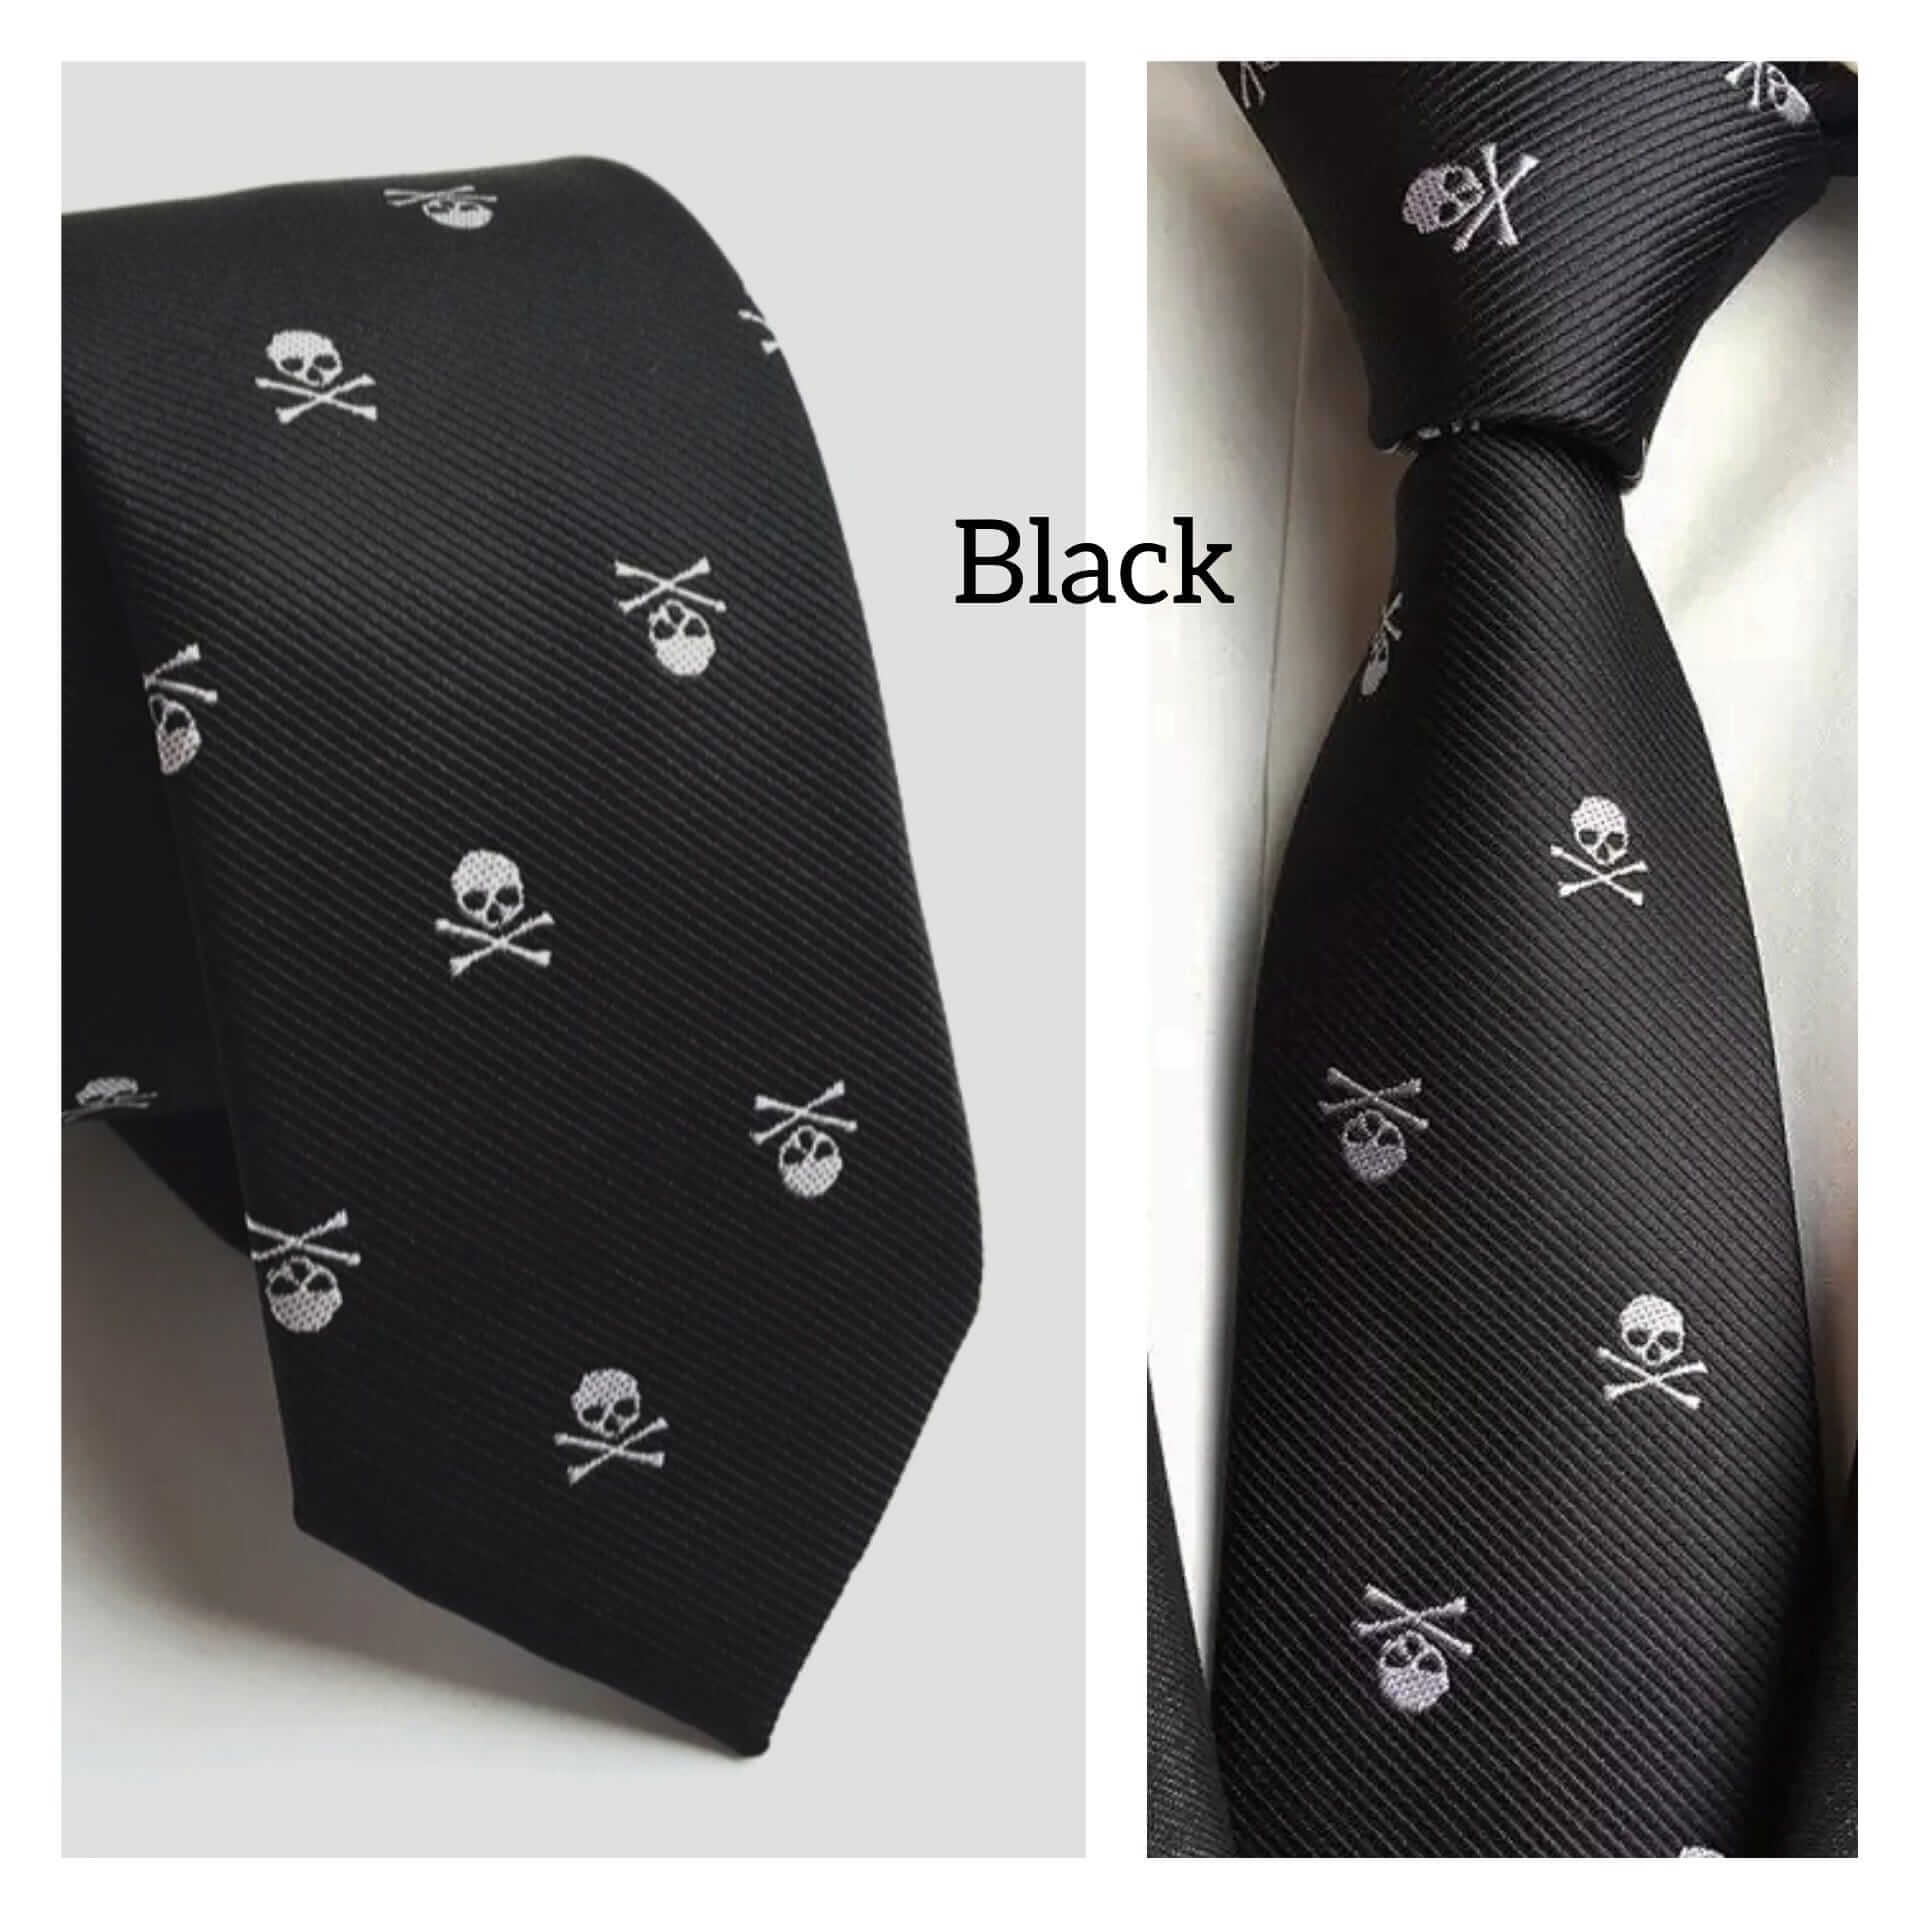 Skull Embroidered Necktie and Pocket Square Jacquard Woven High Quality Set